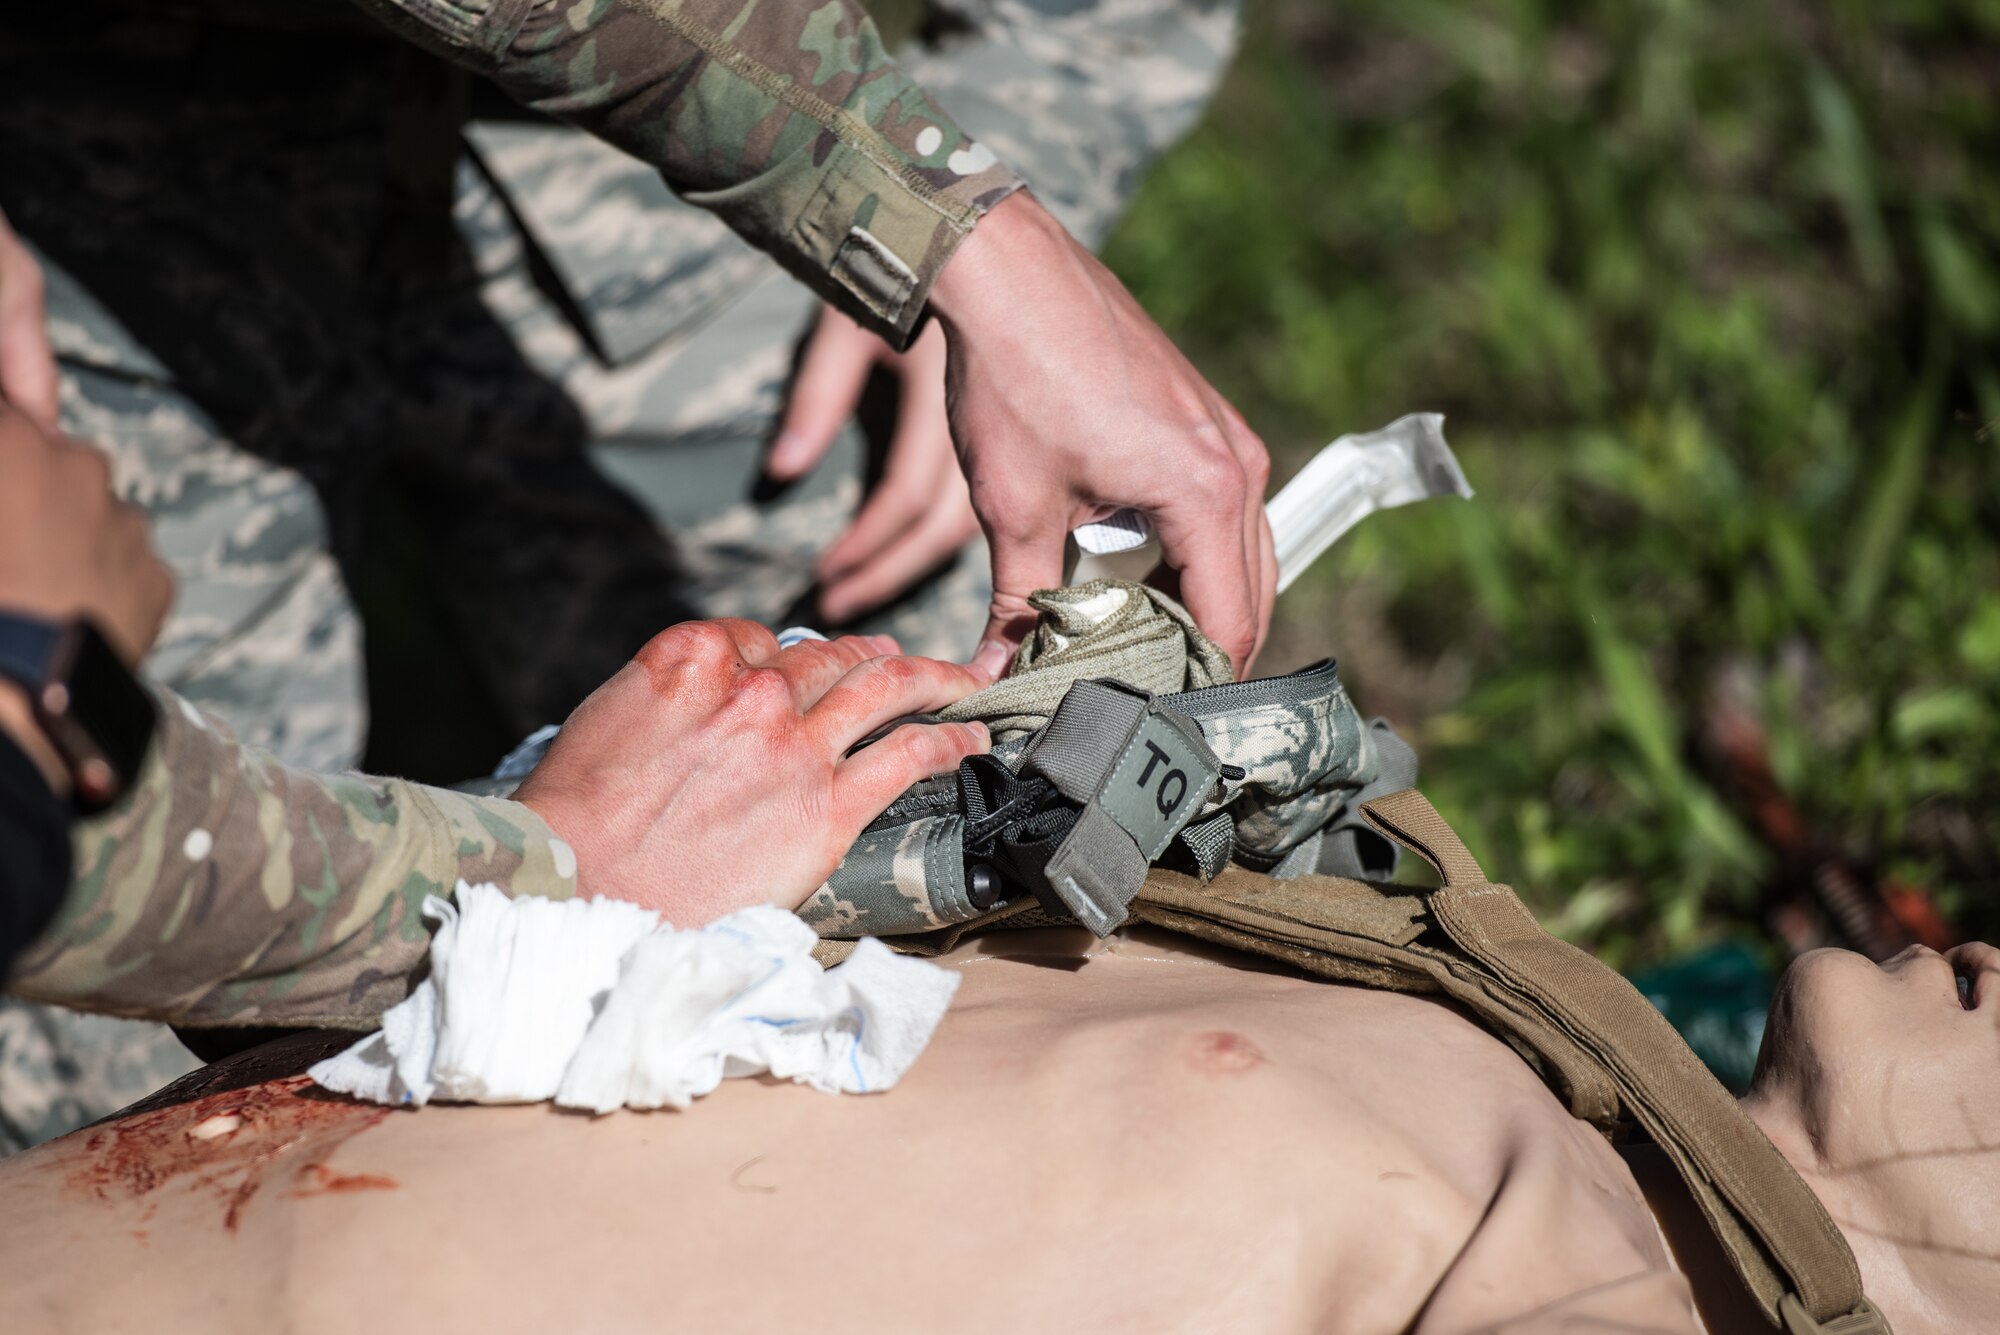 A U.S. Airman from the 193rd Special Operations Medical Group Detachment 1, Pennsylvania Air National Guard, performs medical treatment on a casualty during Tactical Combat Casualty Care training at Annville, Pennsylvania, May 21, 2019. The TCCC training focused on three phases of care: care under fire, tactical field care, and tactical evacuation care. (U.S. Air National Guard photo by Staff Sgt. Tony Harp)